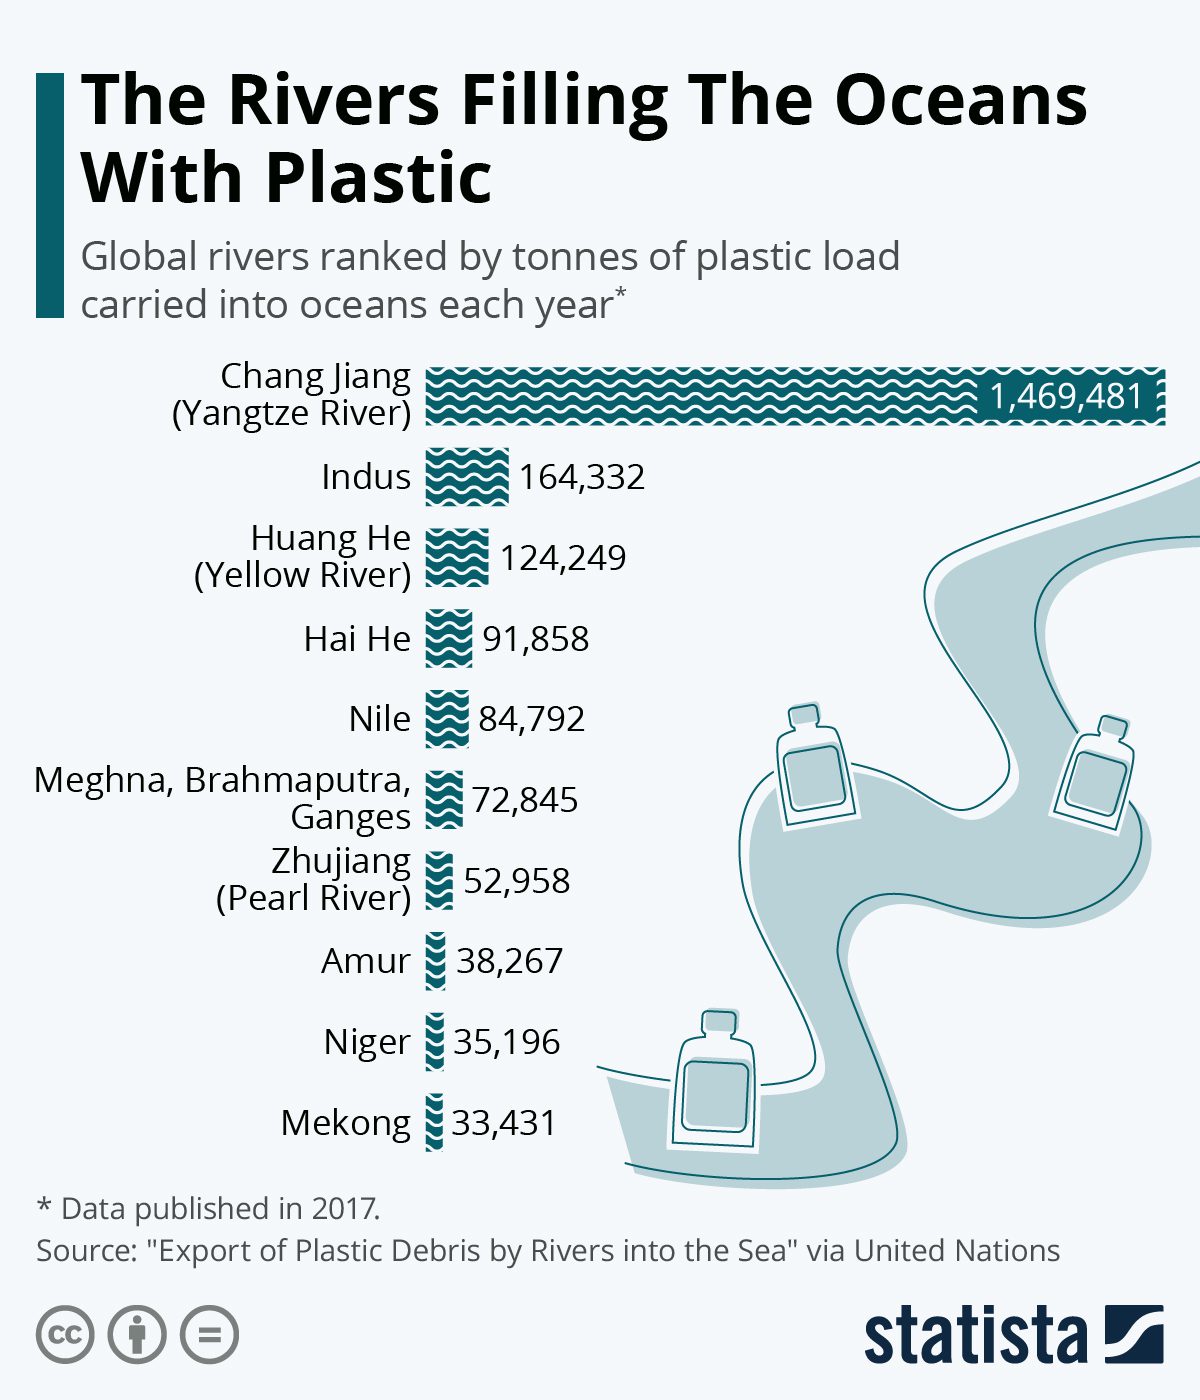 Chart of global rivers, ranked by tons of plastic load carried into oceans each year.